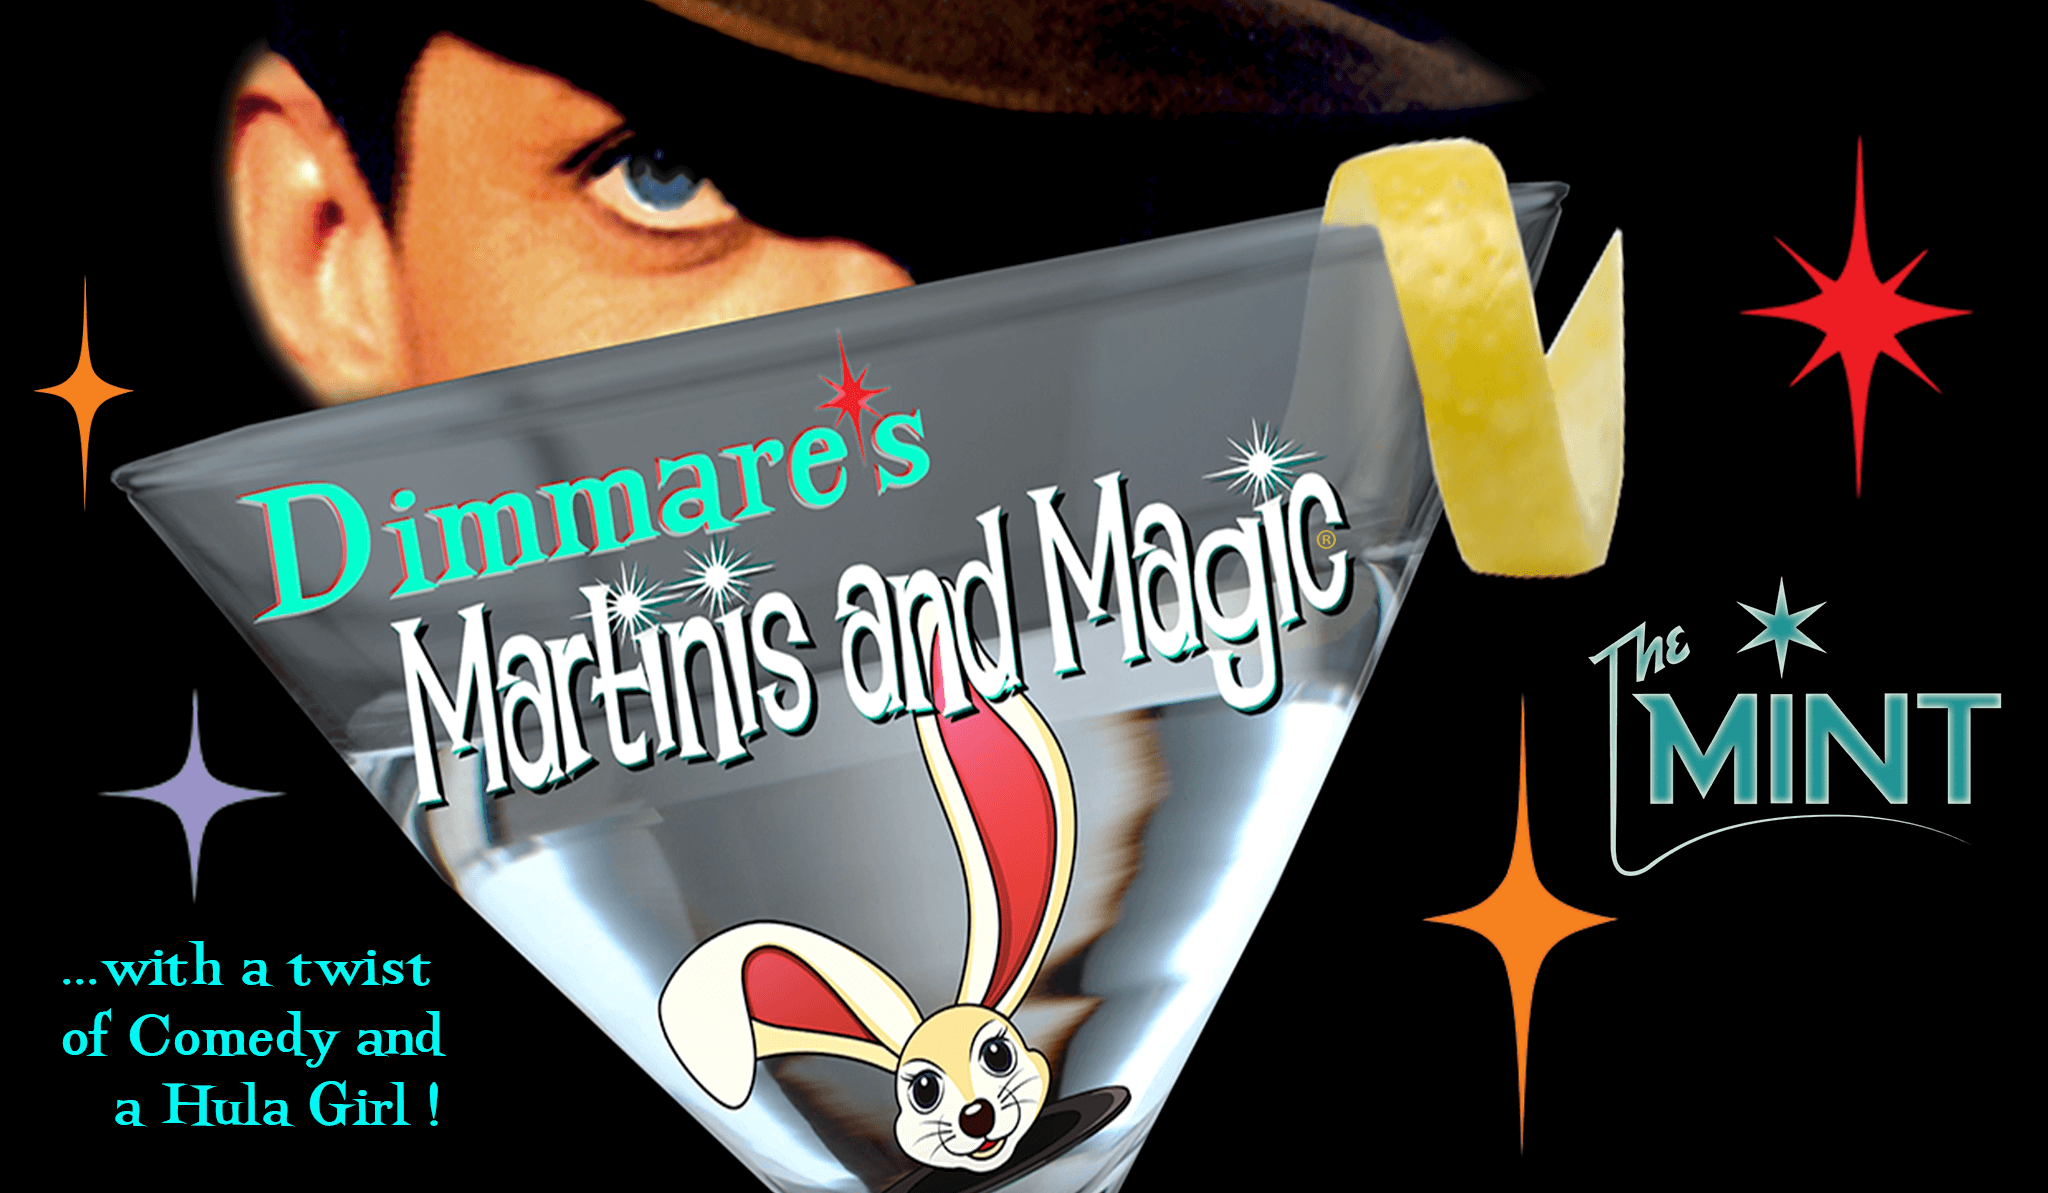 Dimmare's Martinis and Magic...with a twist of comedy and a Hula Girl!